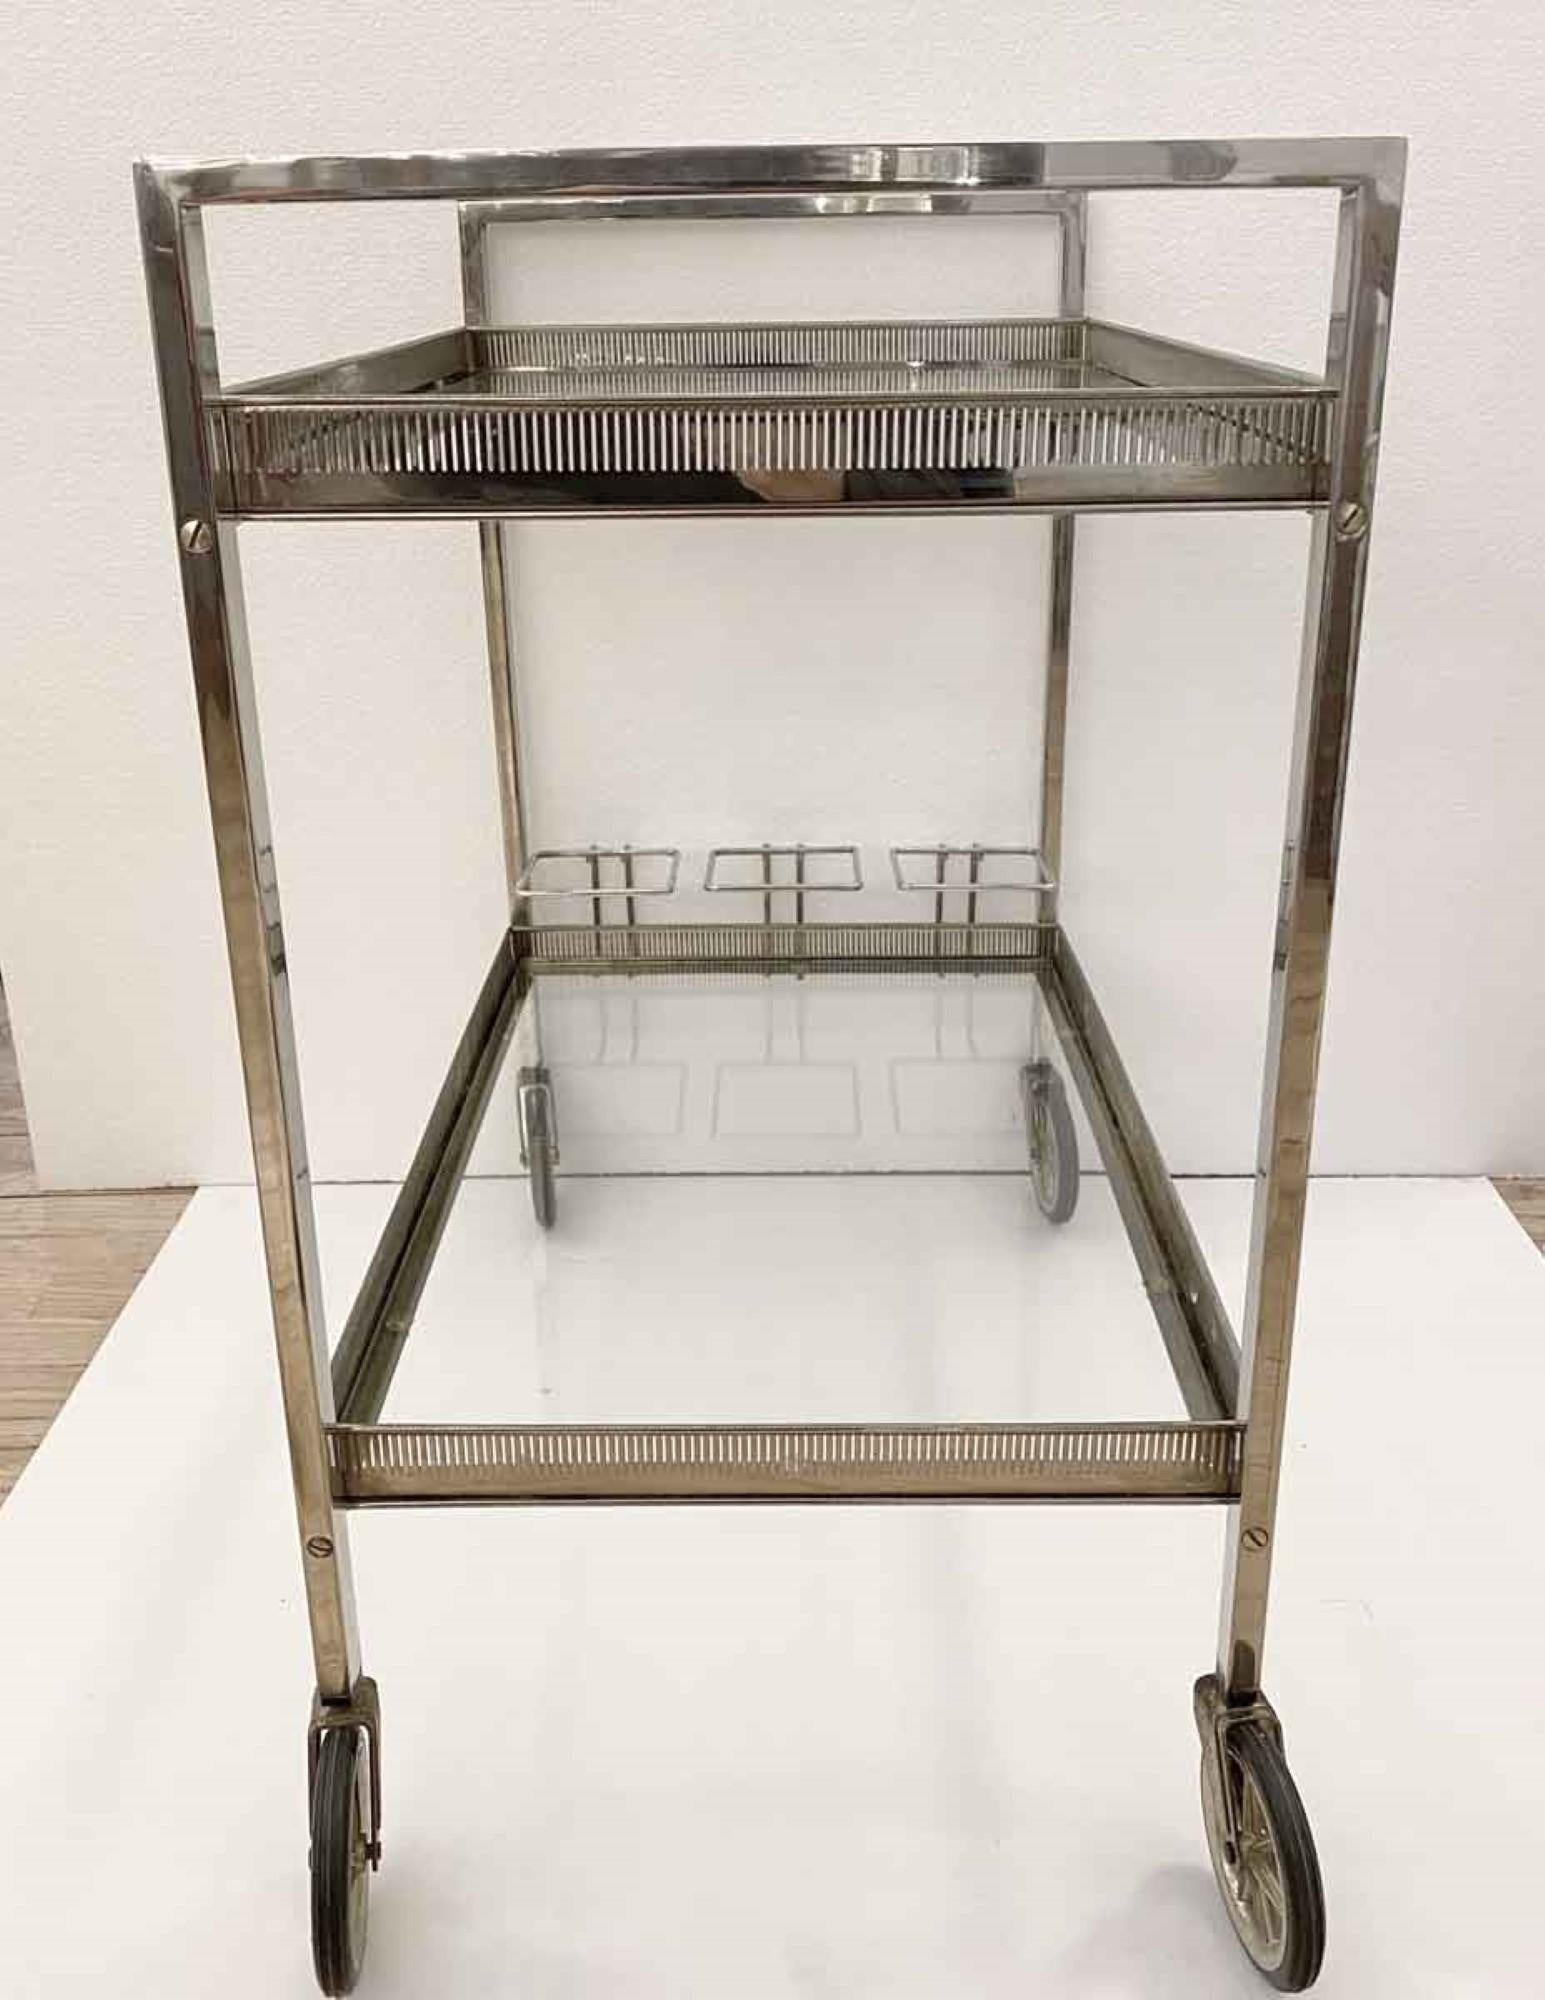 Late 20th Century 1990s Mid-Century Modern Bar Cart from Belgium, Nickel-Plated with Glass Shelves